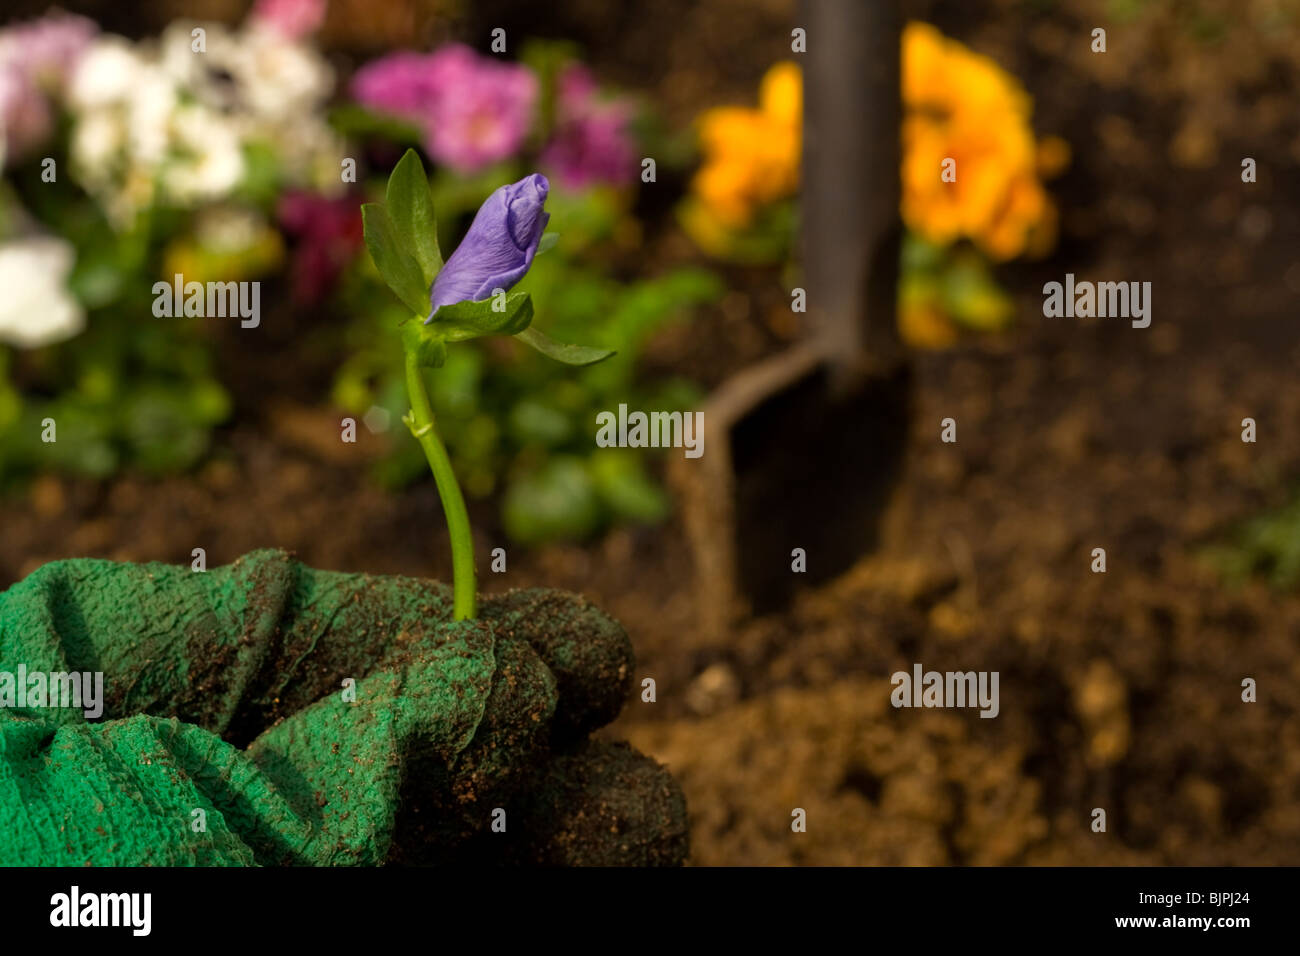 part of a hand with green glove holds in foreground a new flower on background blurred colorfull pansies, spade in soil. Stock Photo